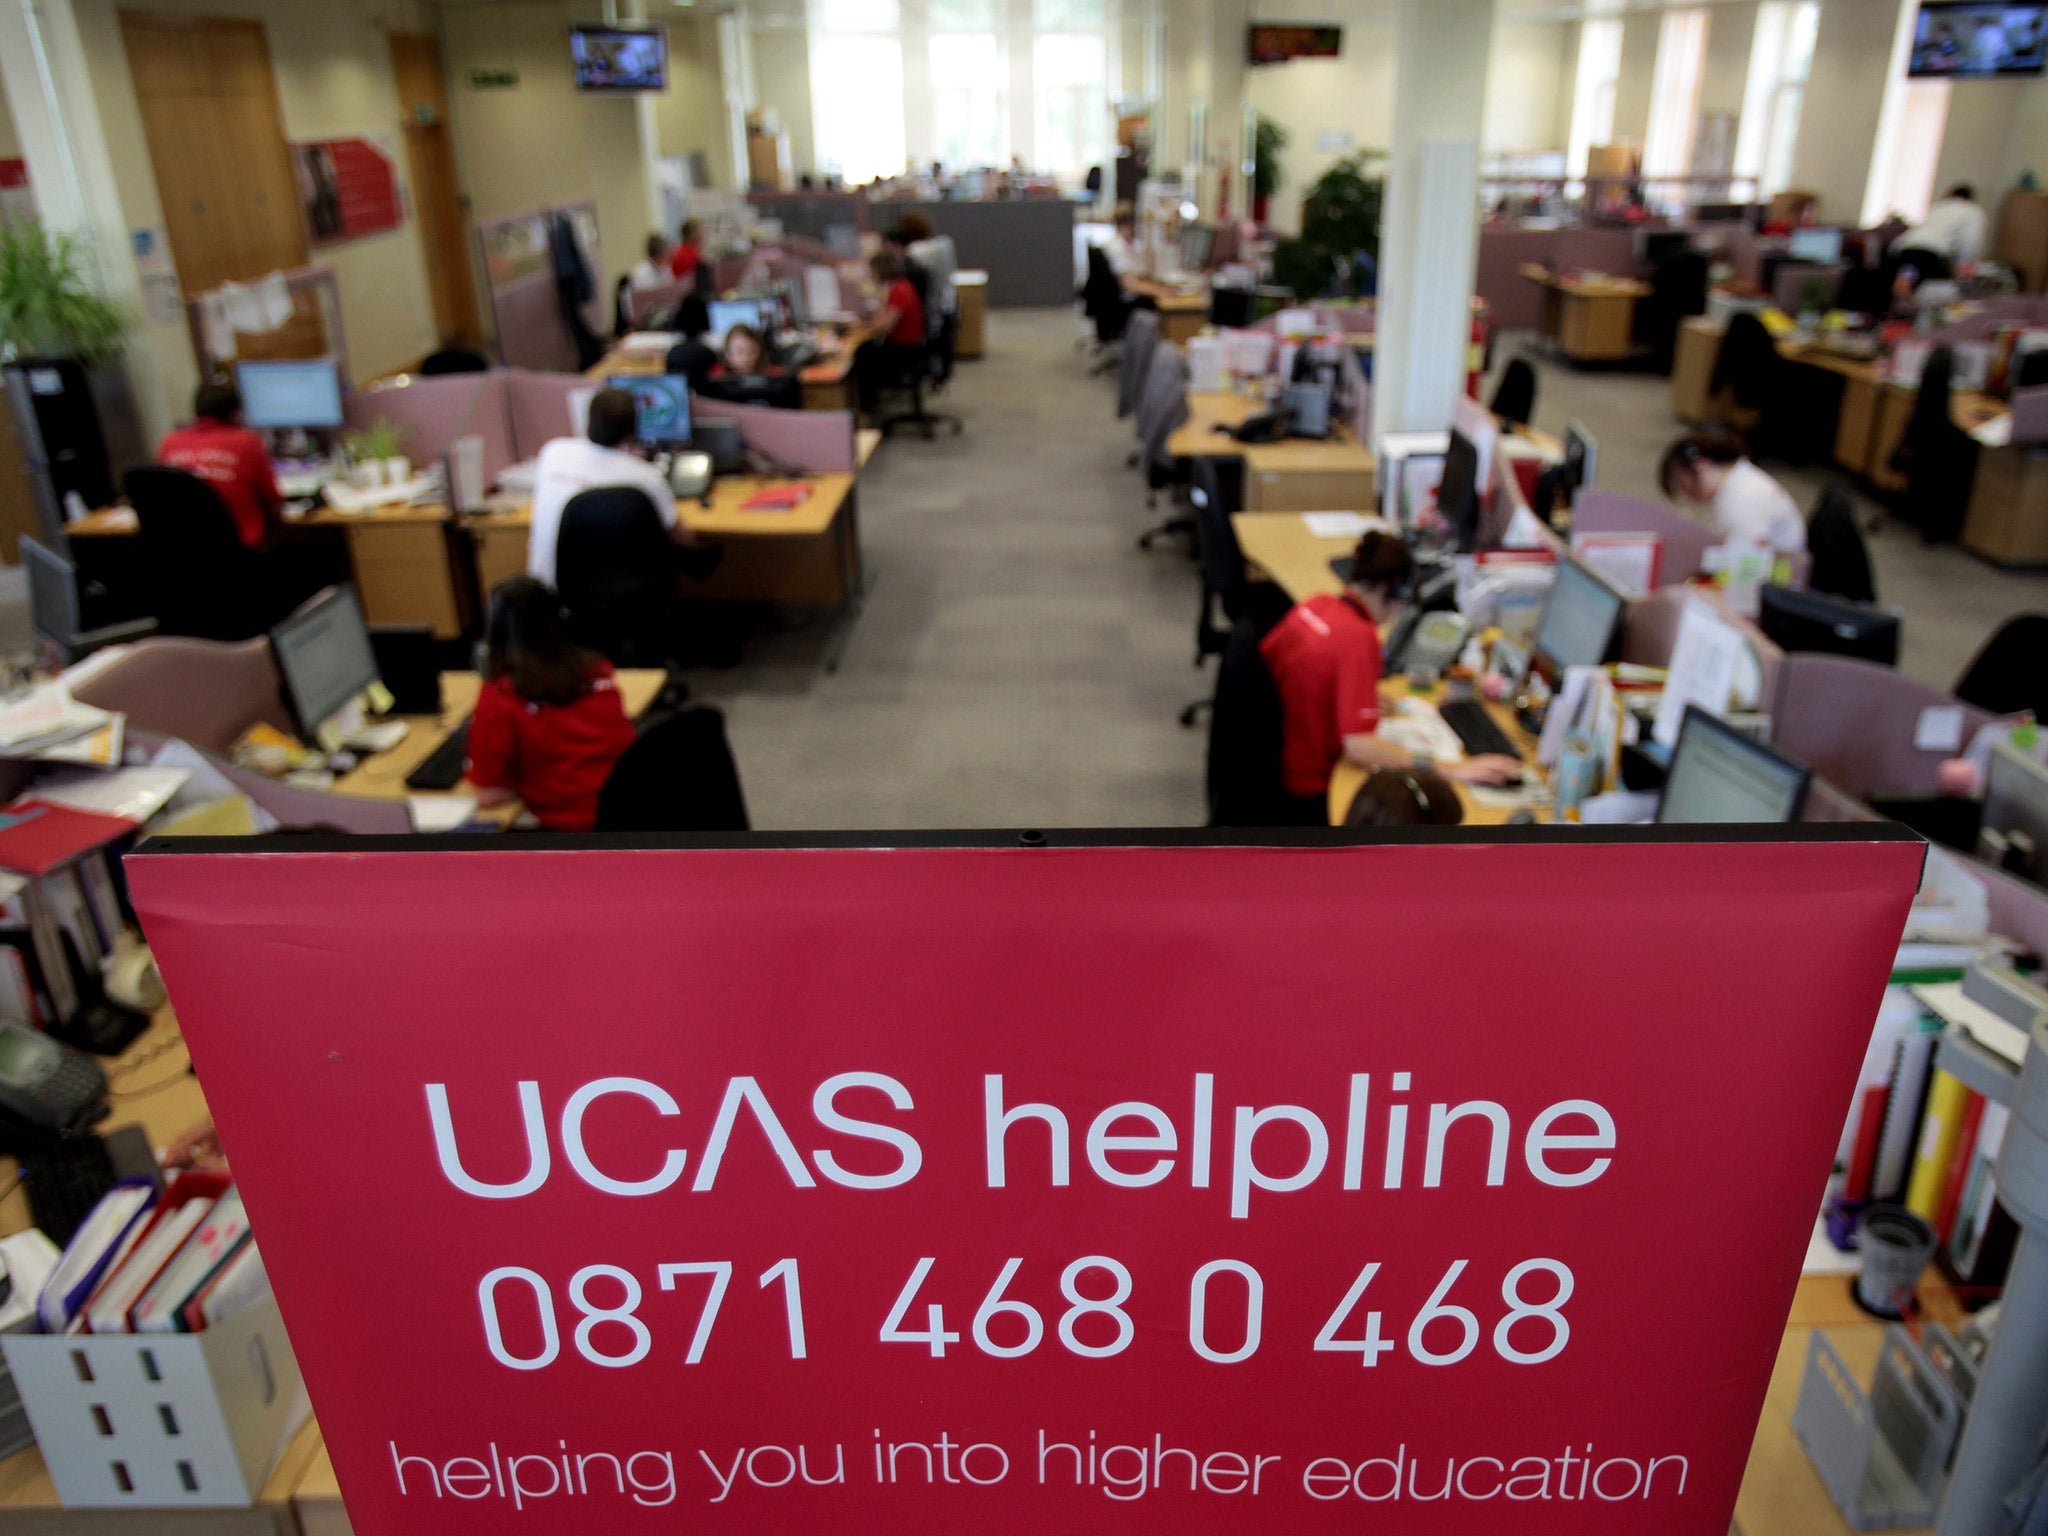 The UCAS clearing house call centre in Cheltenham, England